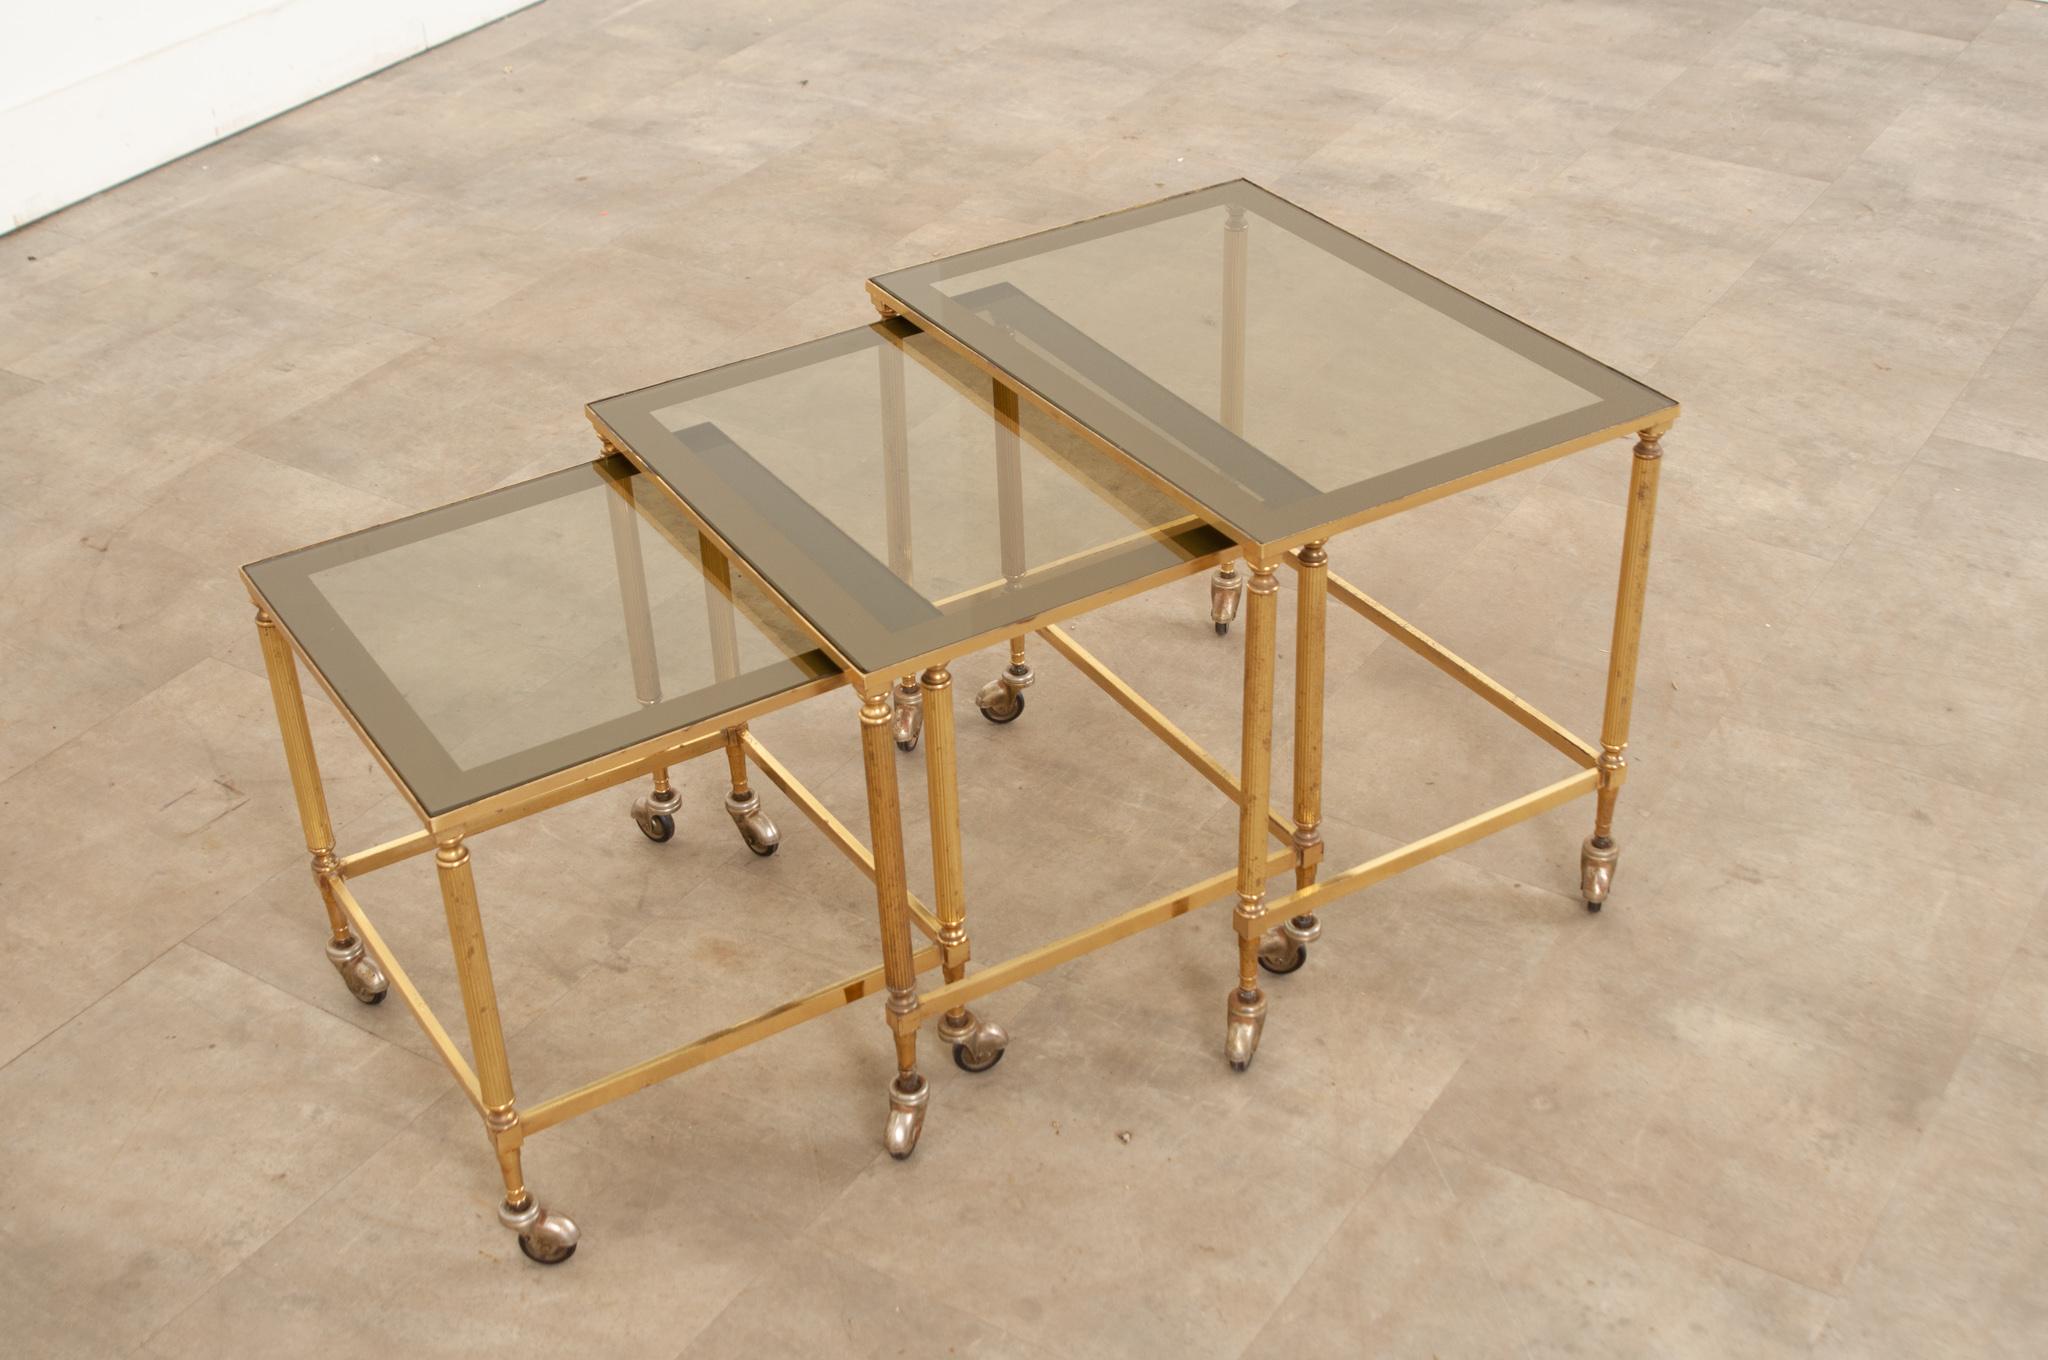 Set of three 20th century English, brass nesting tables with inset tinted glass tops supported by fluted column legs capped with turned finials and finished with casters allowing for effortless mobility. Versatile and substantial, these tables can